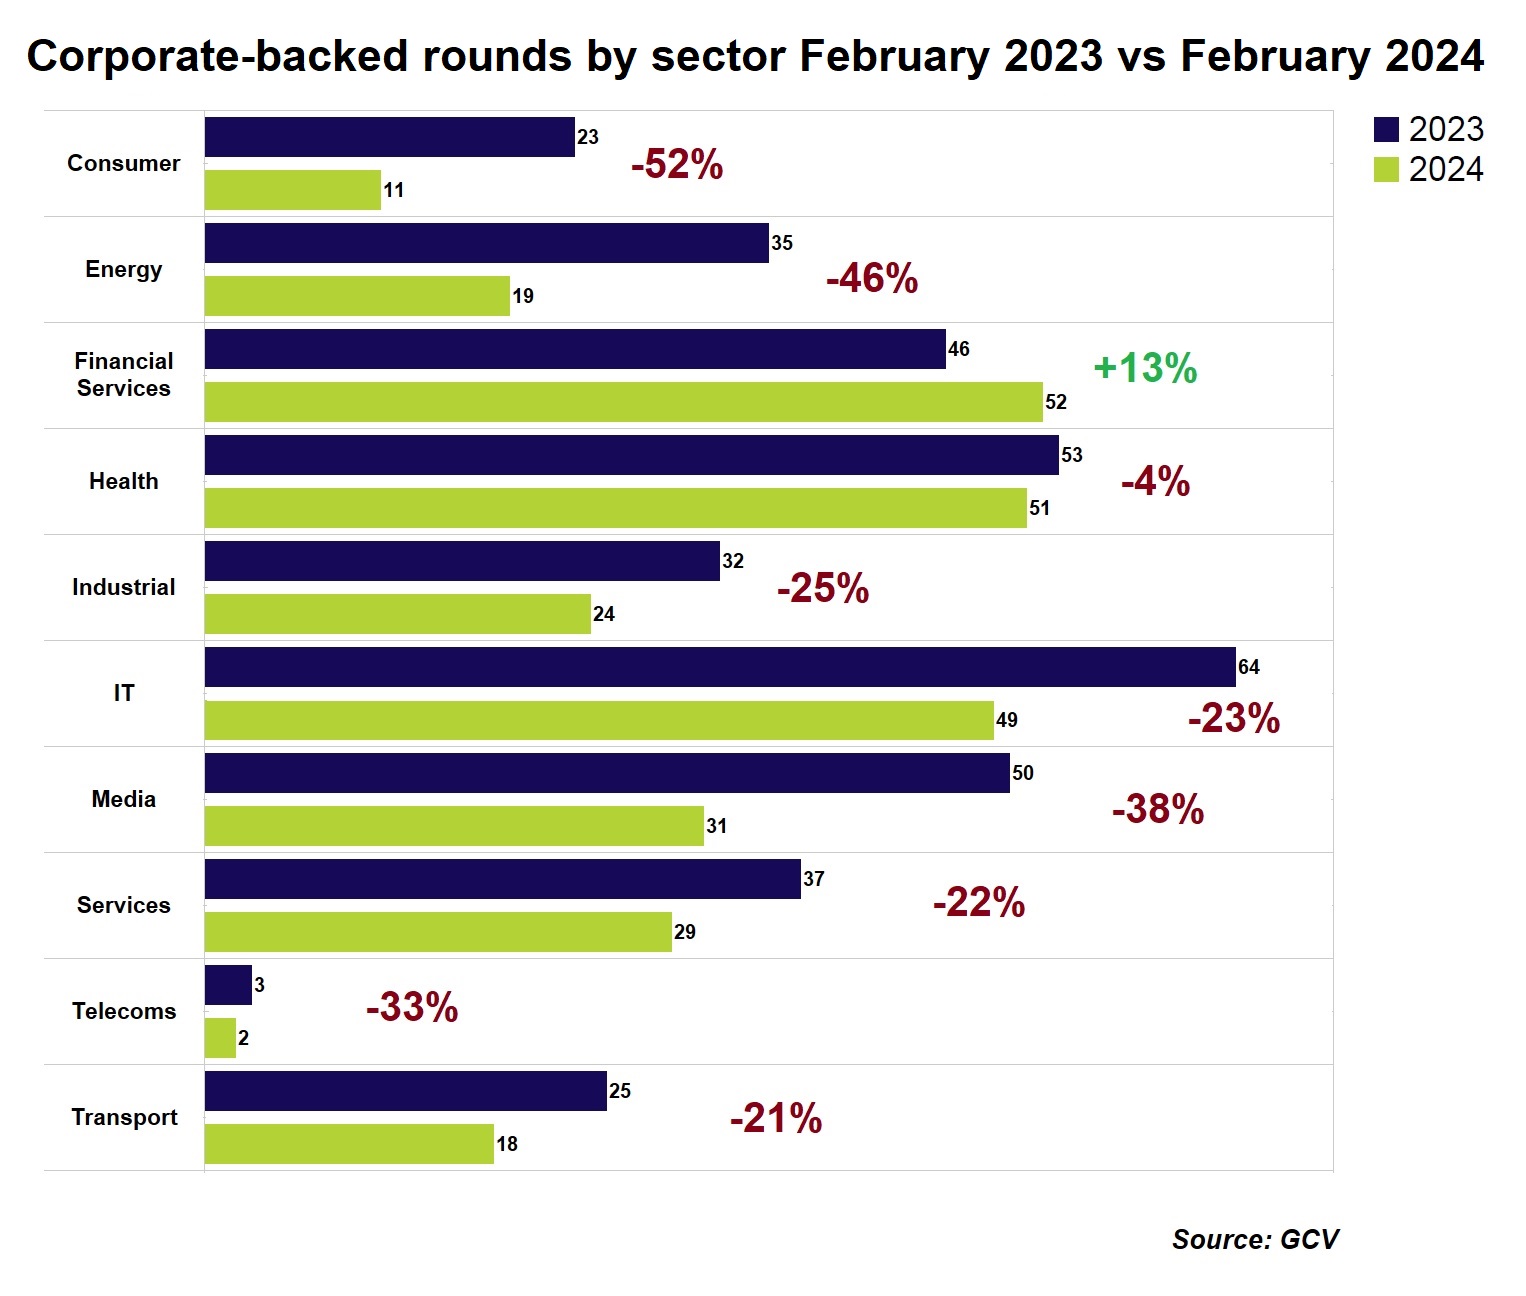 Horizontal bar chart showing corporates-backed rounds by sector February 2023 vs February 2024. Source: GCV